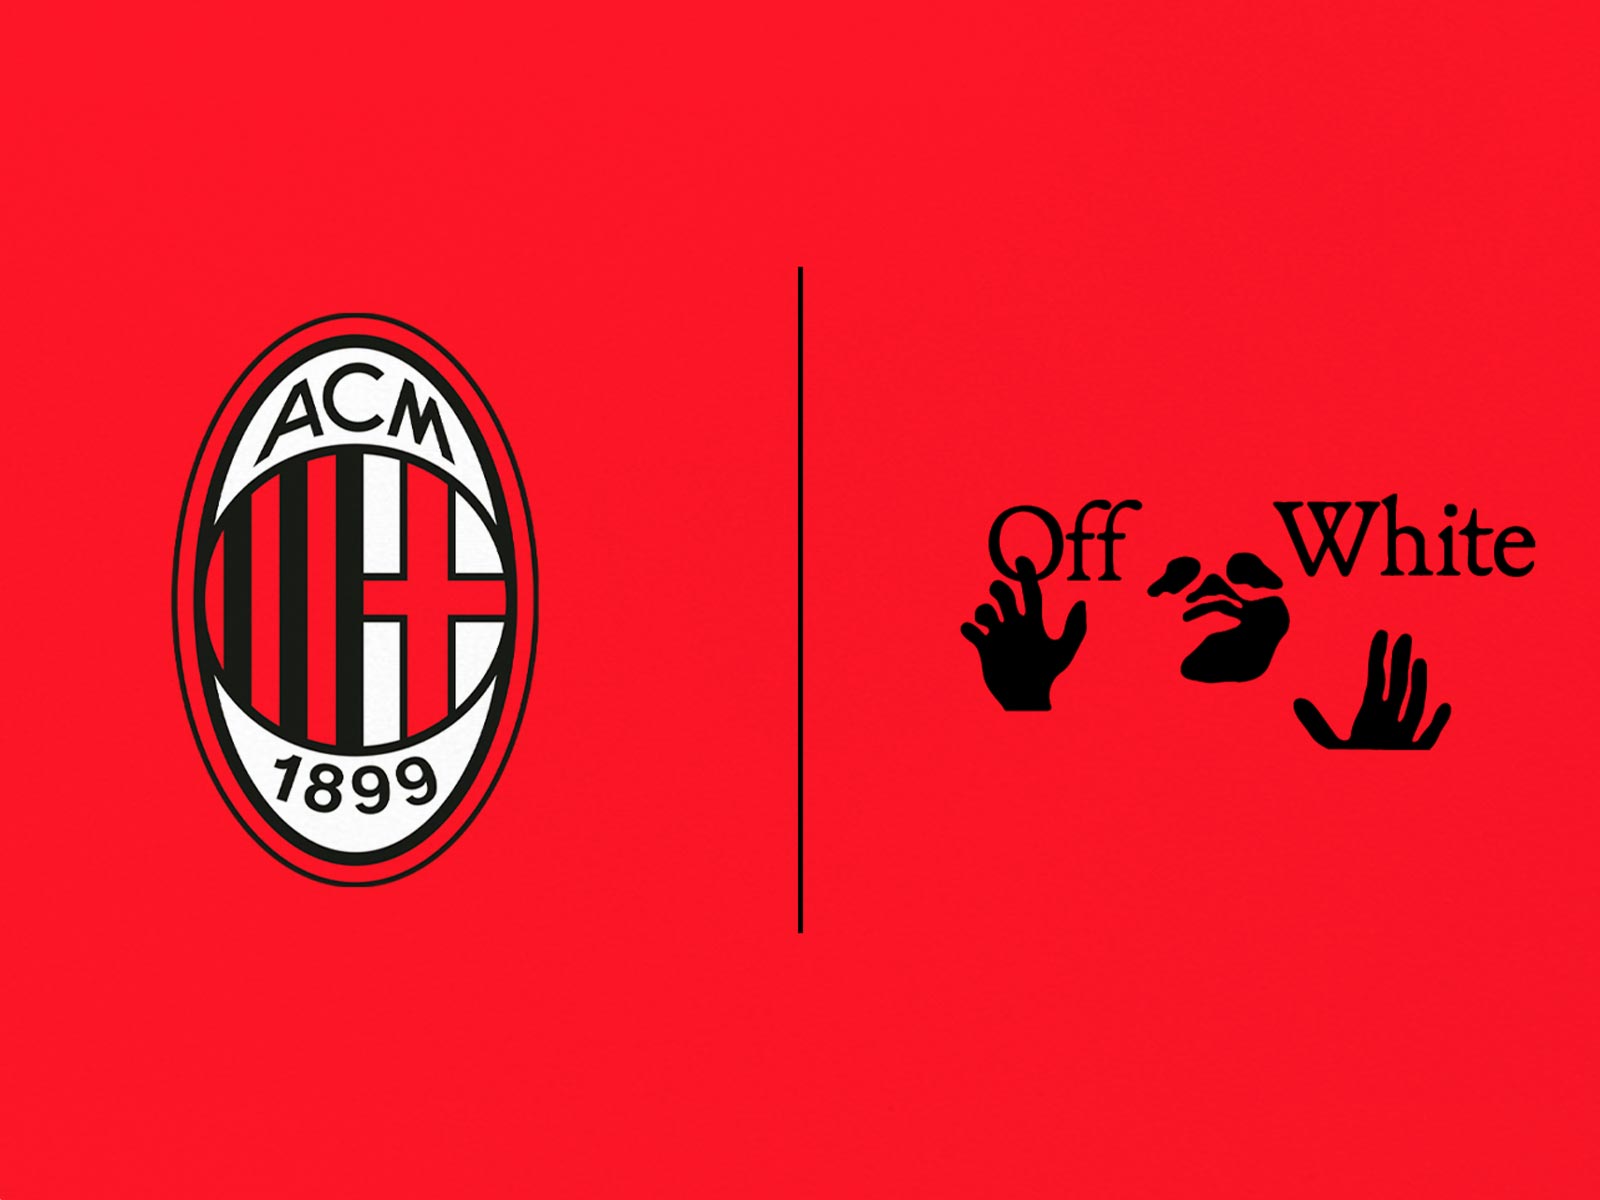 Off-White™ partners with AC Milan